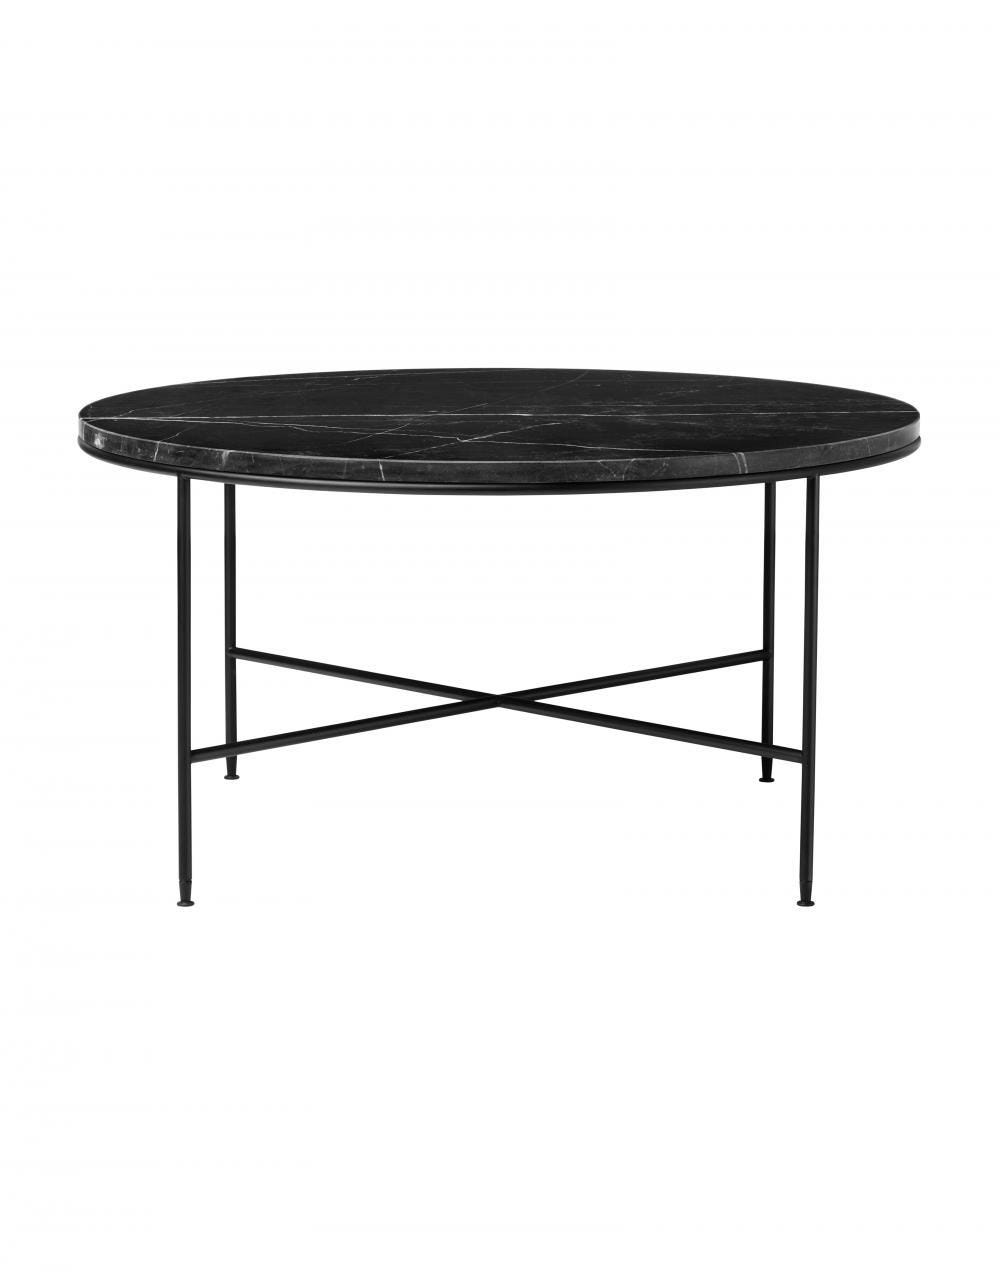 Fritz Hansen Planner Coffee Tables Circular Charcoal Black Designer Furniture From Holloways Of Ludlow